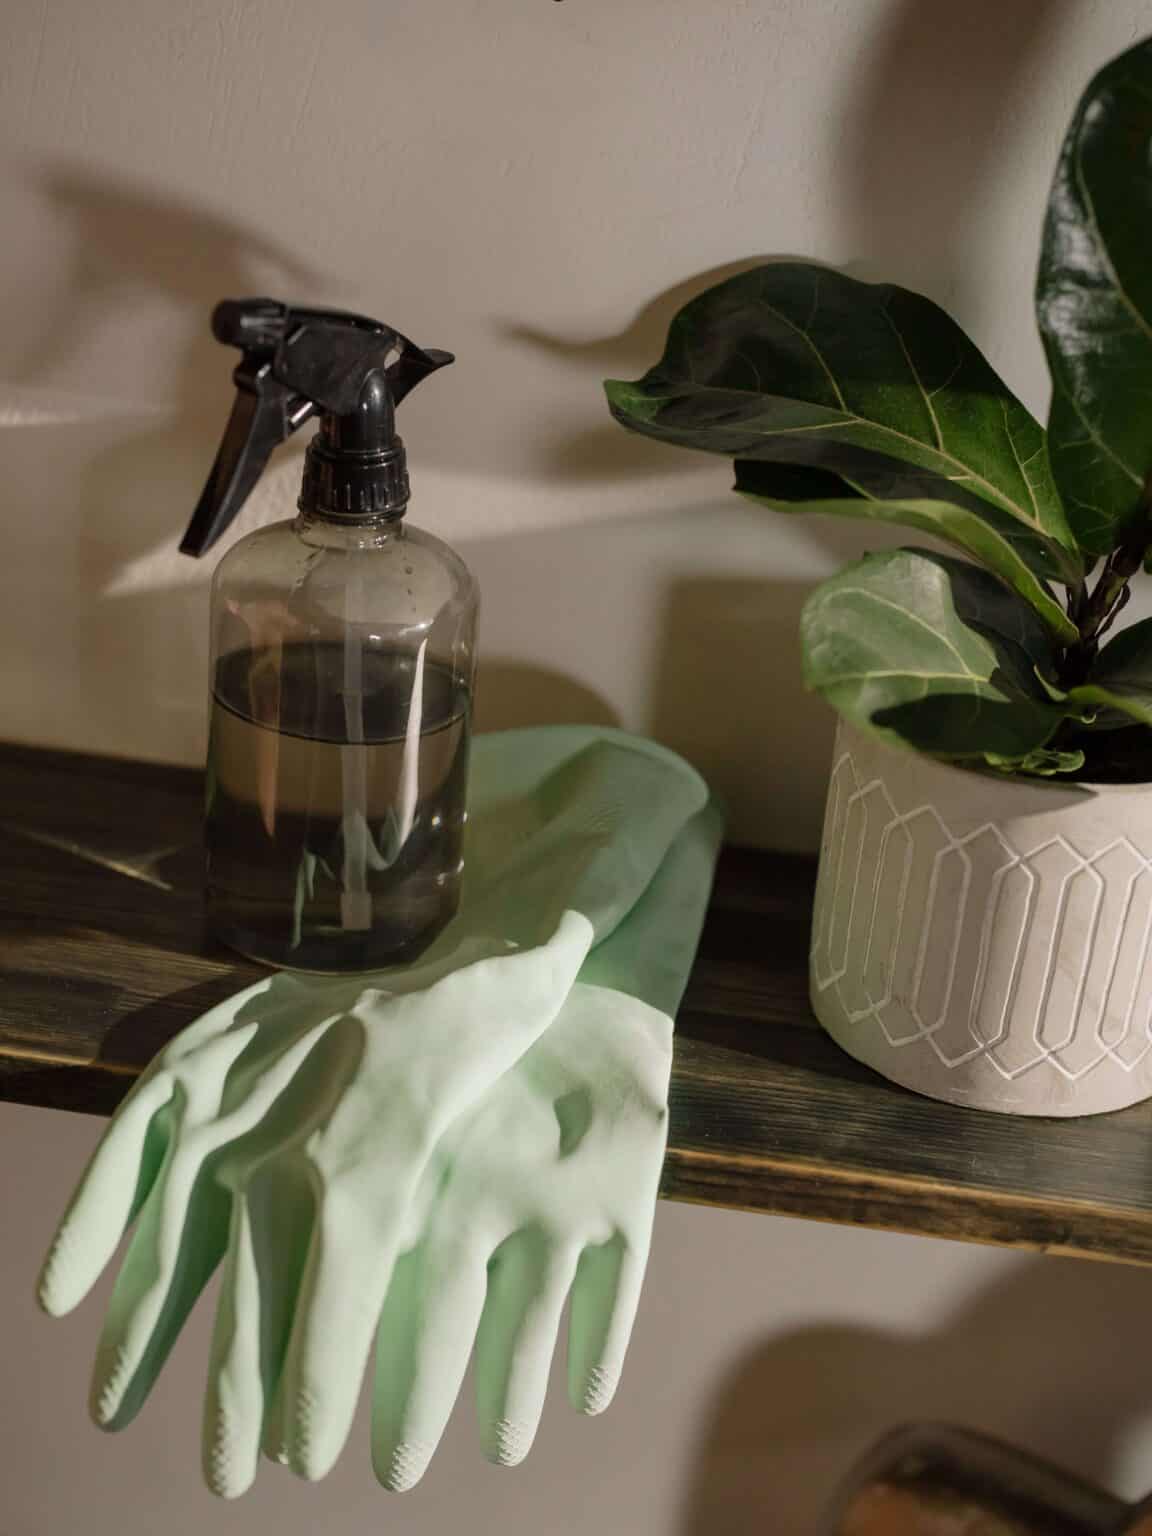 spray bottle and rubber gloves sitting on shelf by plant